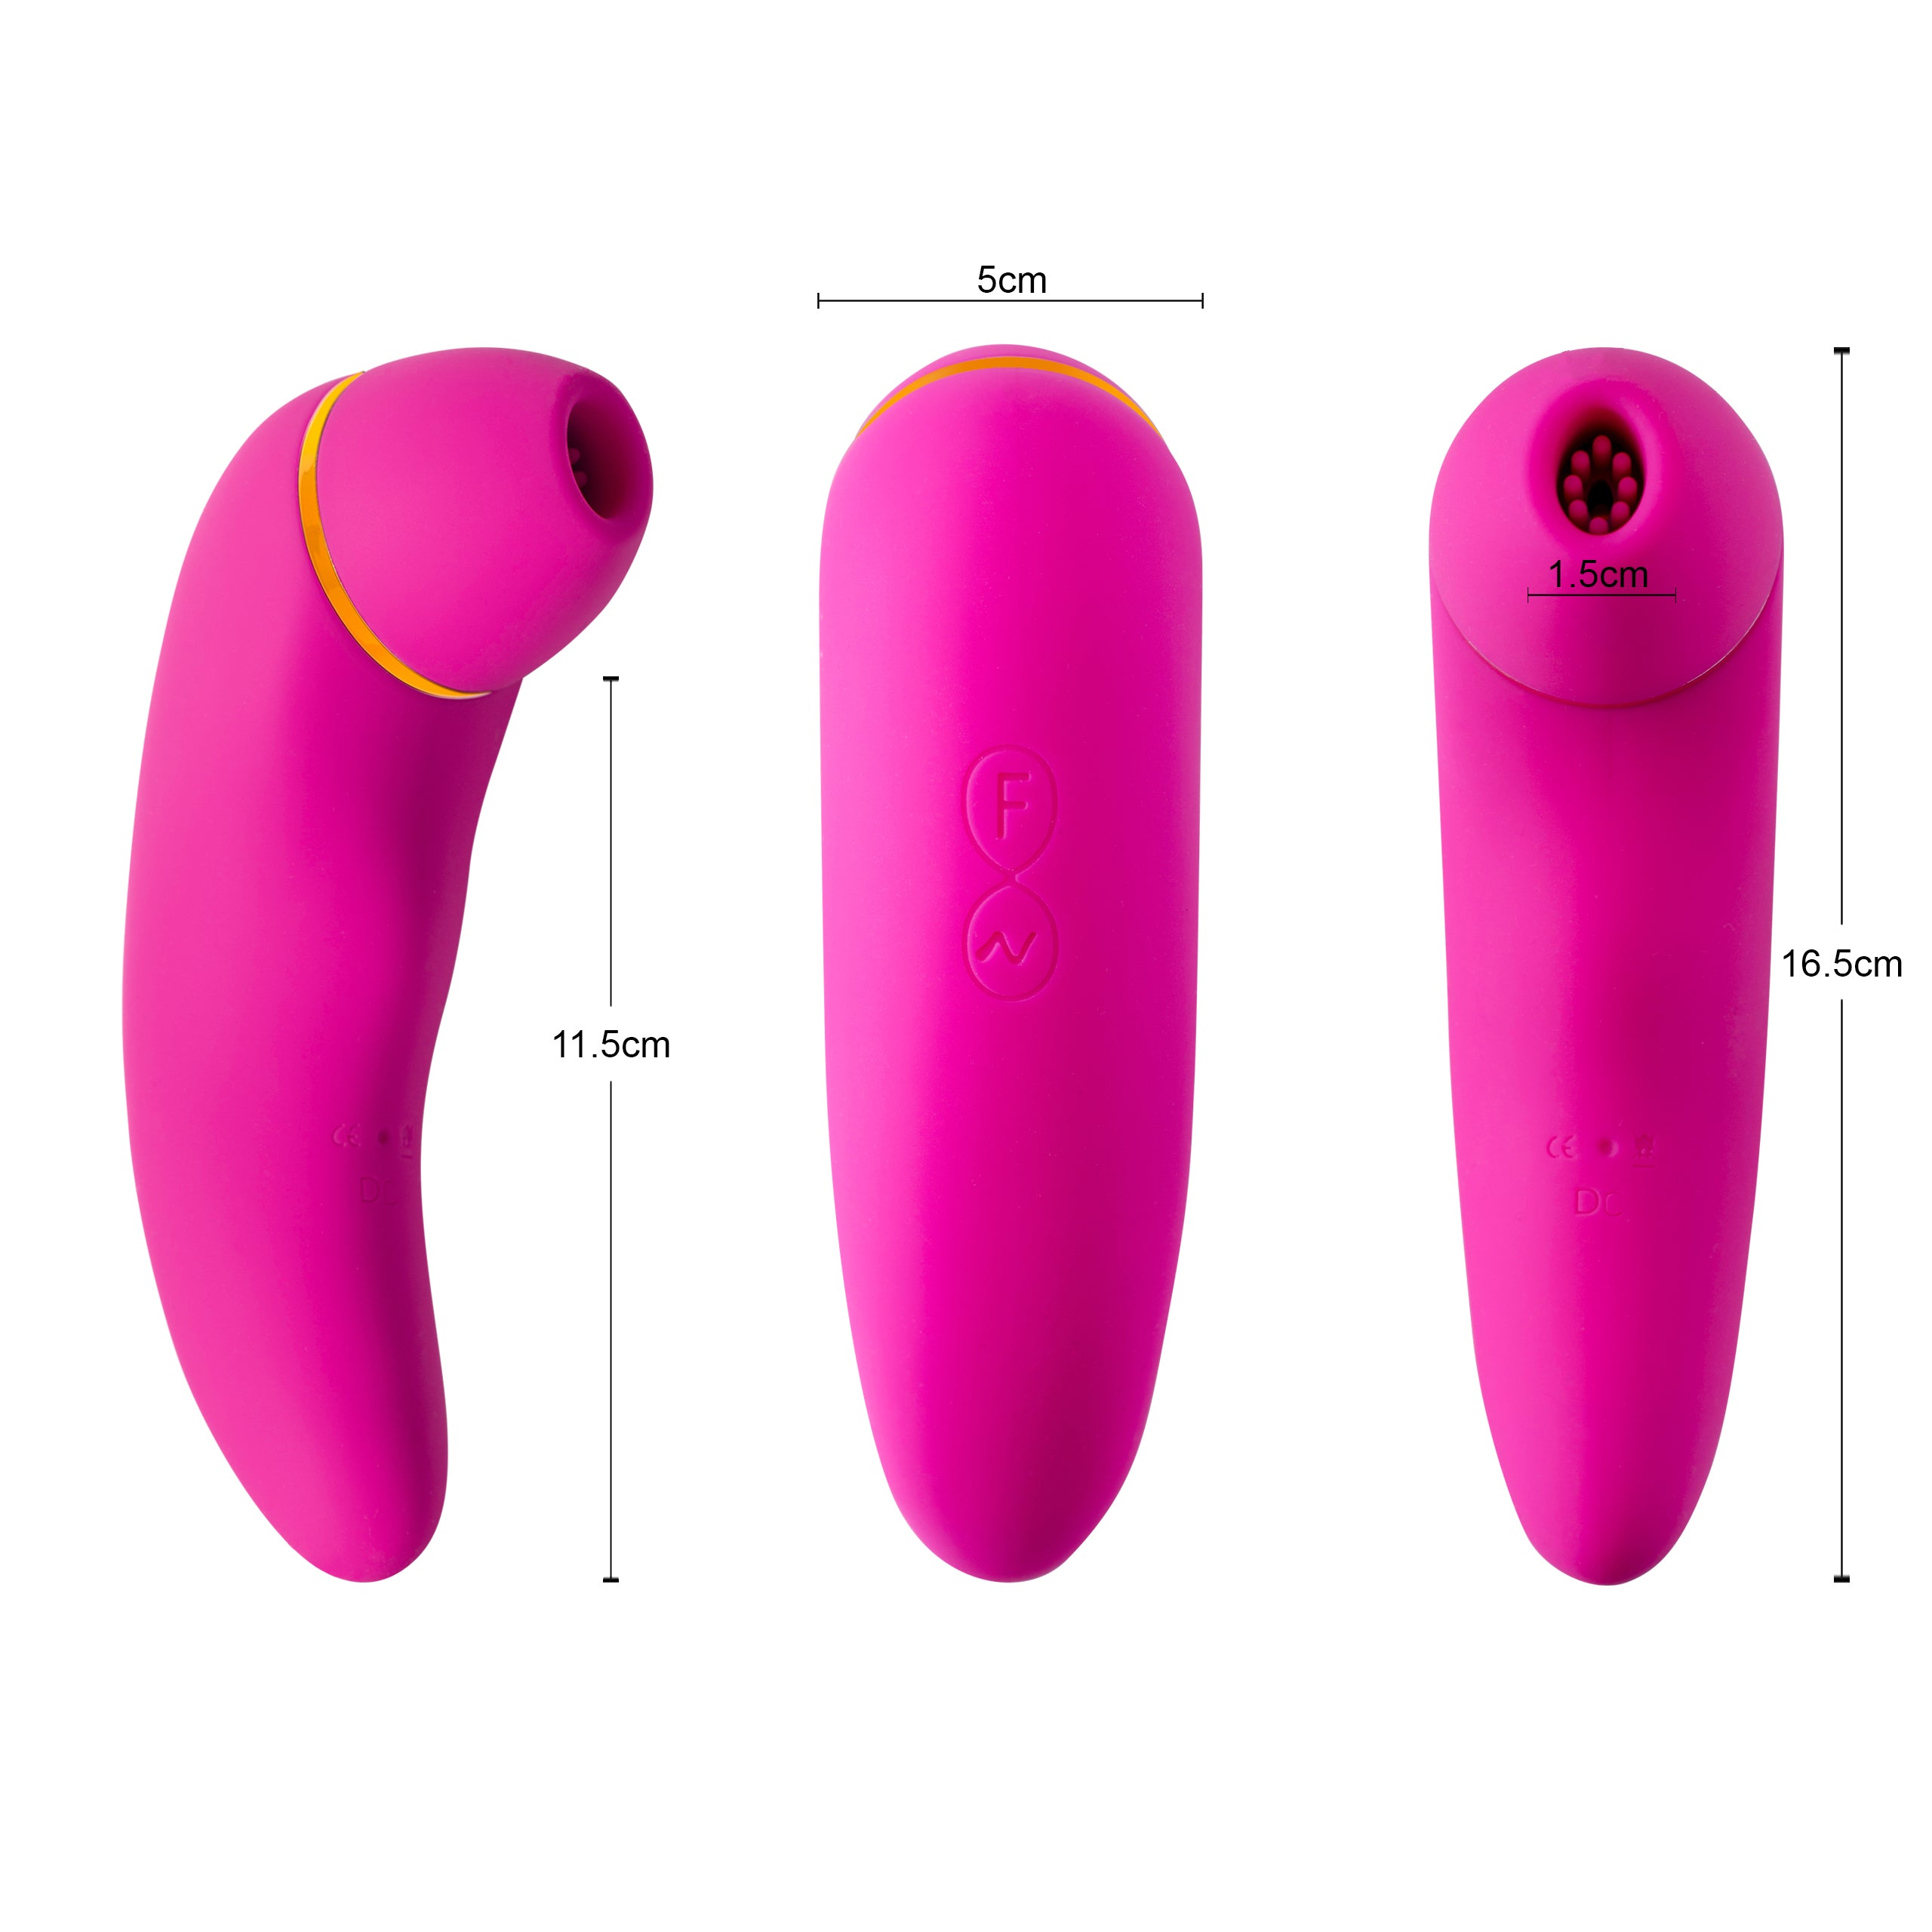 HUGBOX PRO clitoris sucker, satisfayer, sex toy, erotic toy, sex toy woman, dildo, 30 programs. Silent, smooth and powerful, 100% waterproof